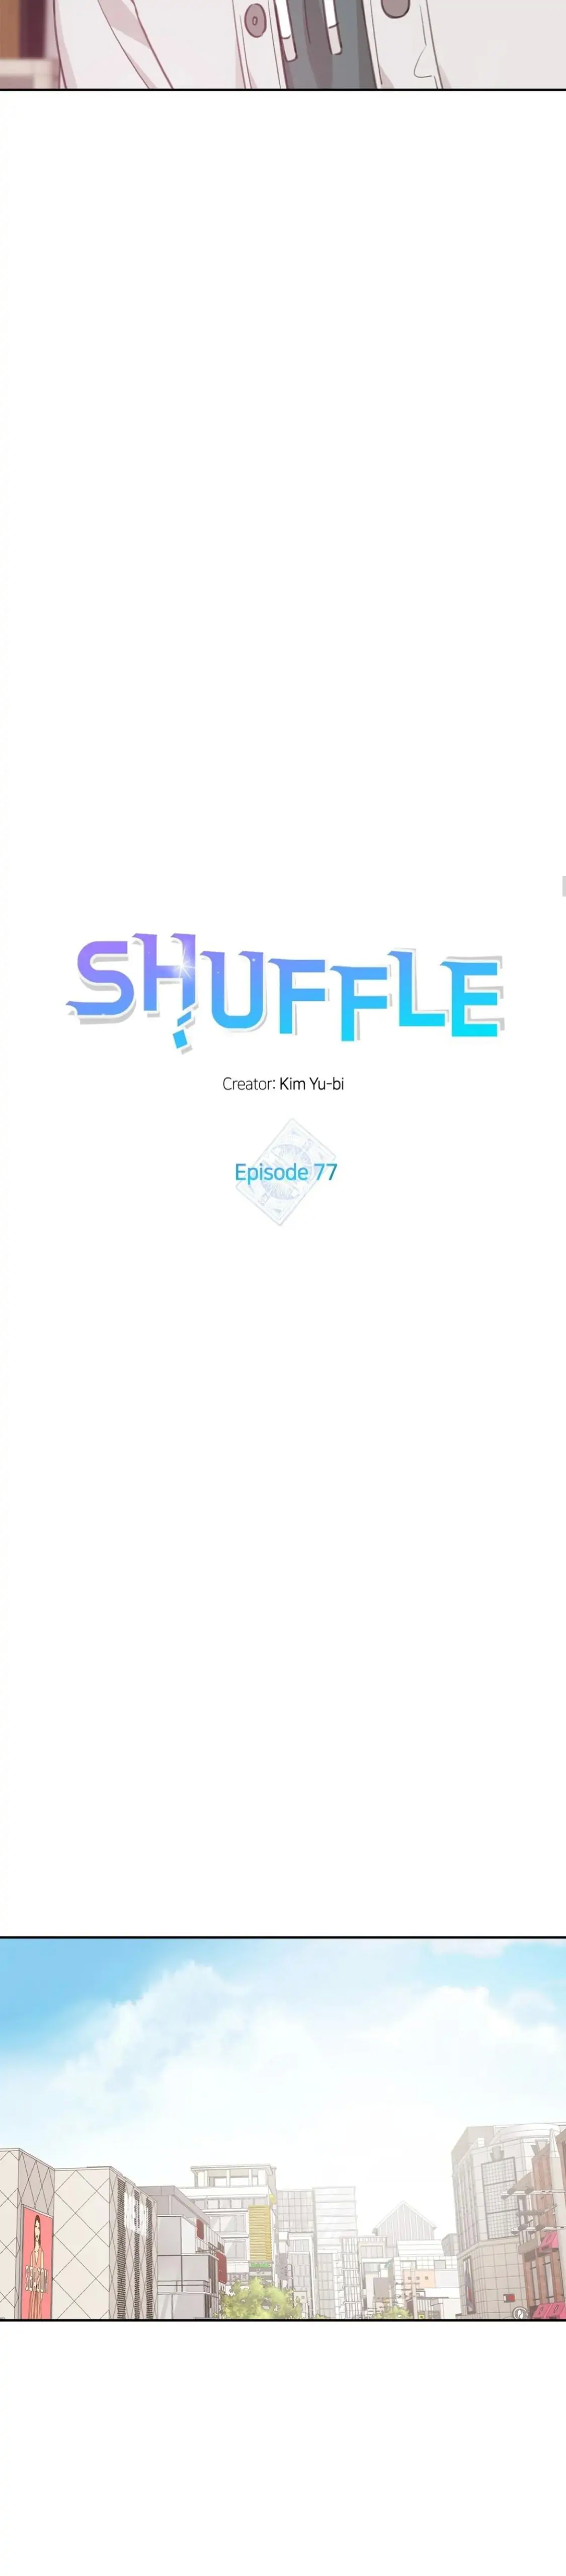 Shuffle! - Days In The Bloom - episode 78 - 9